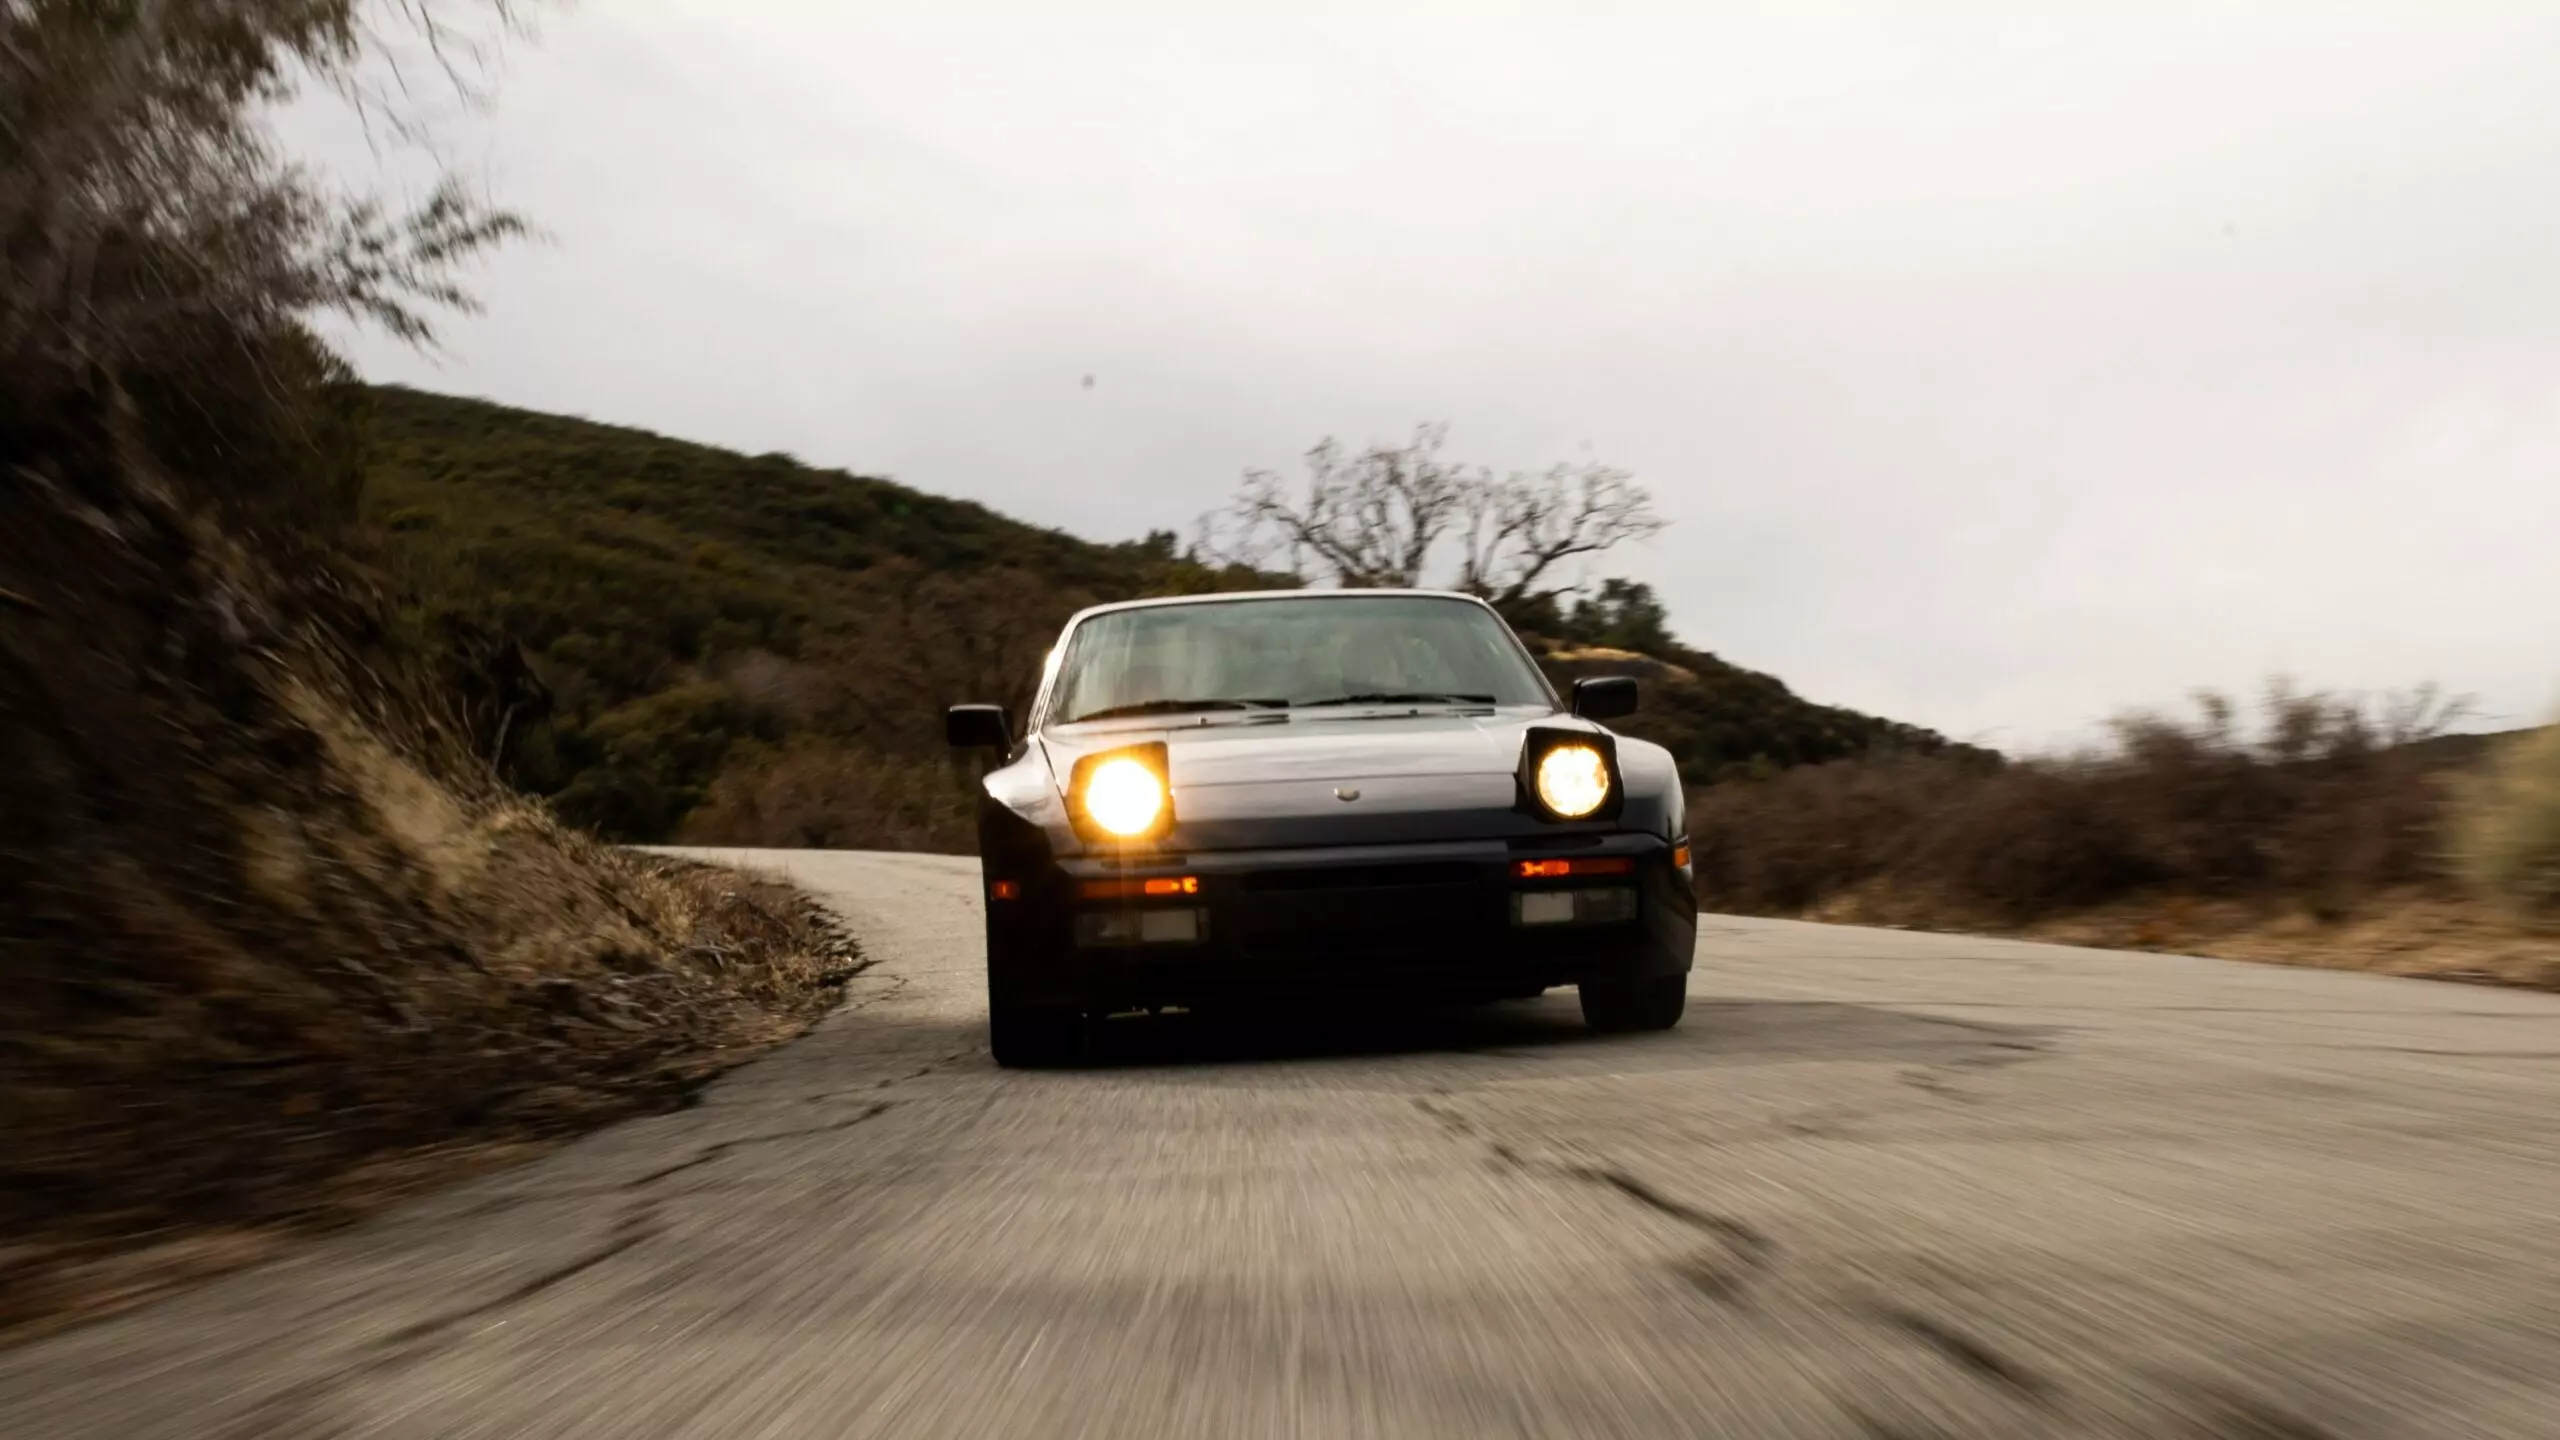 Buying This Porsche 944 Turbo Was Tedious but Worth It | Autance